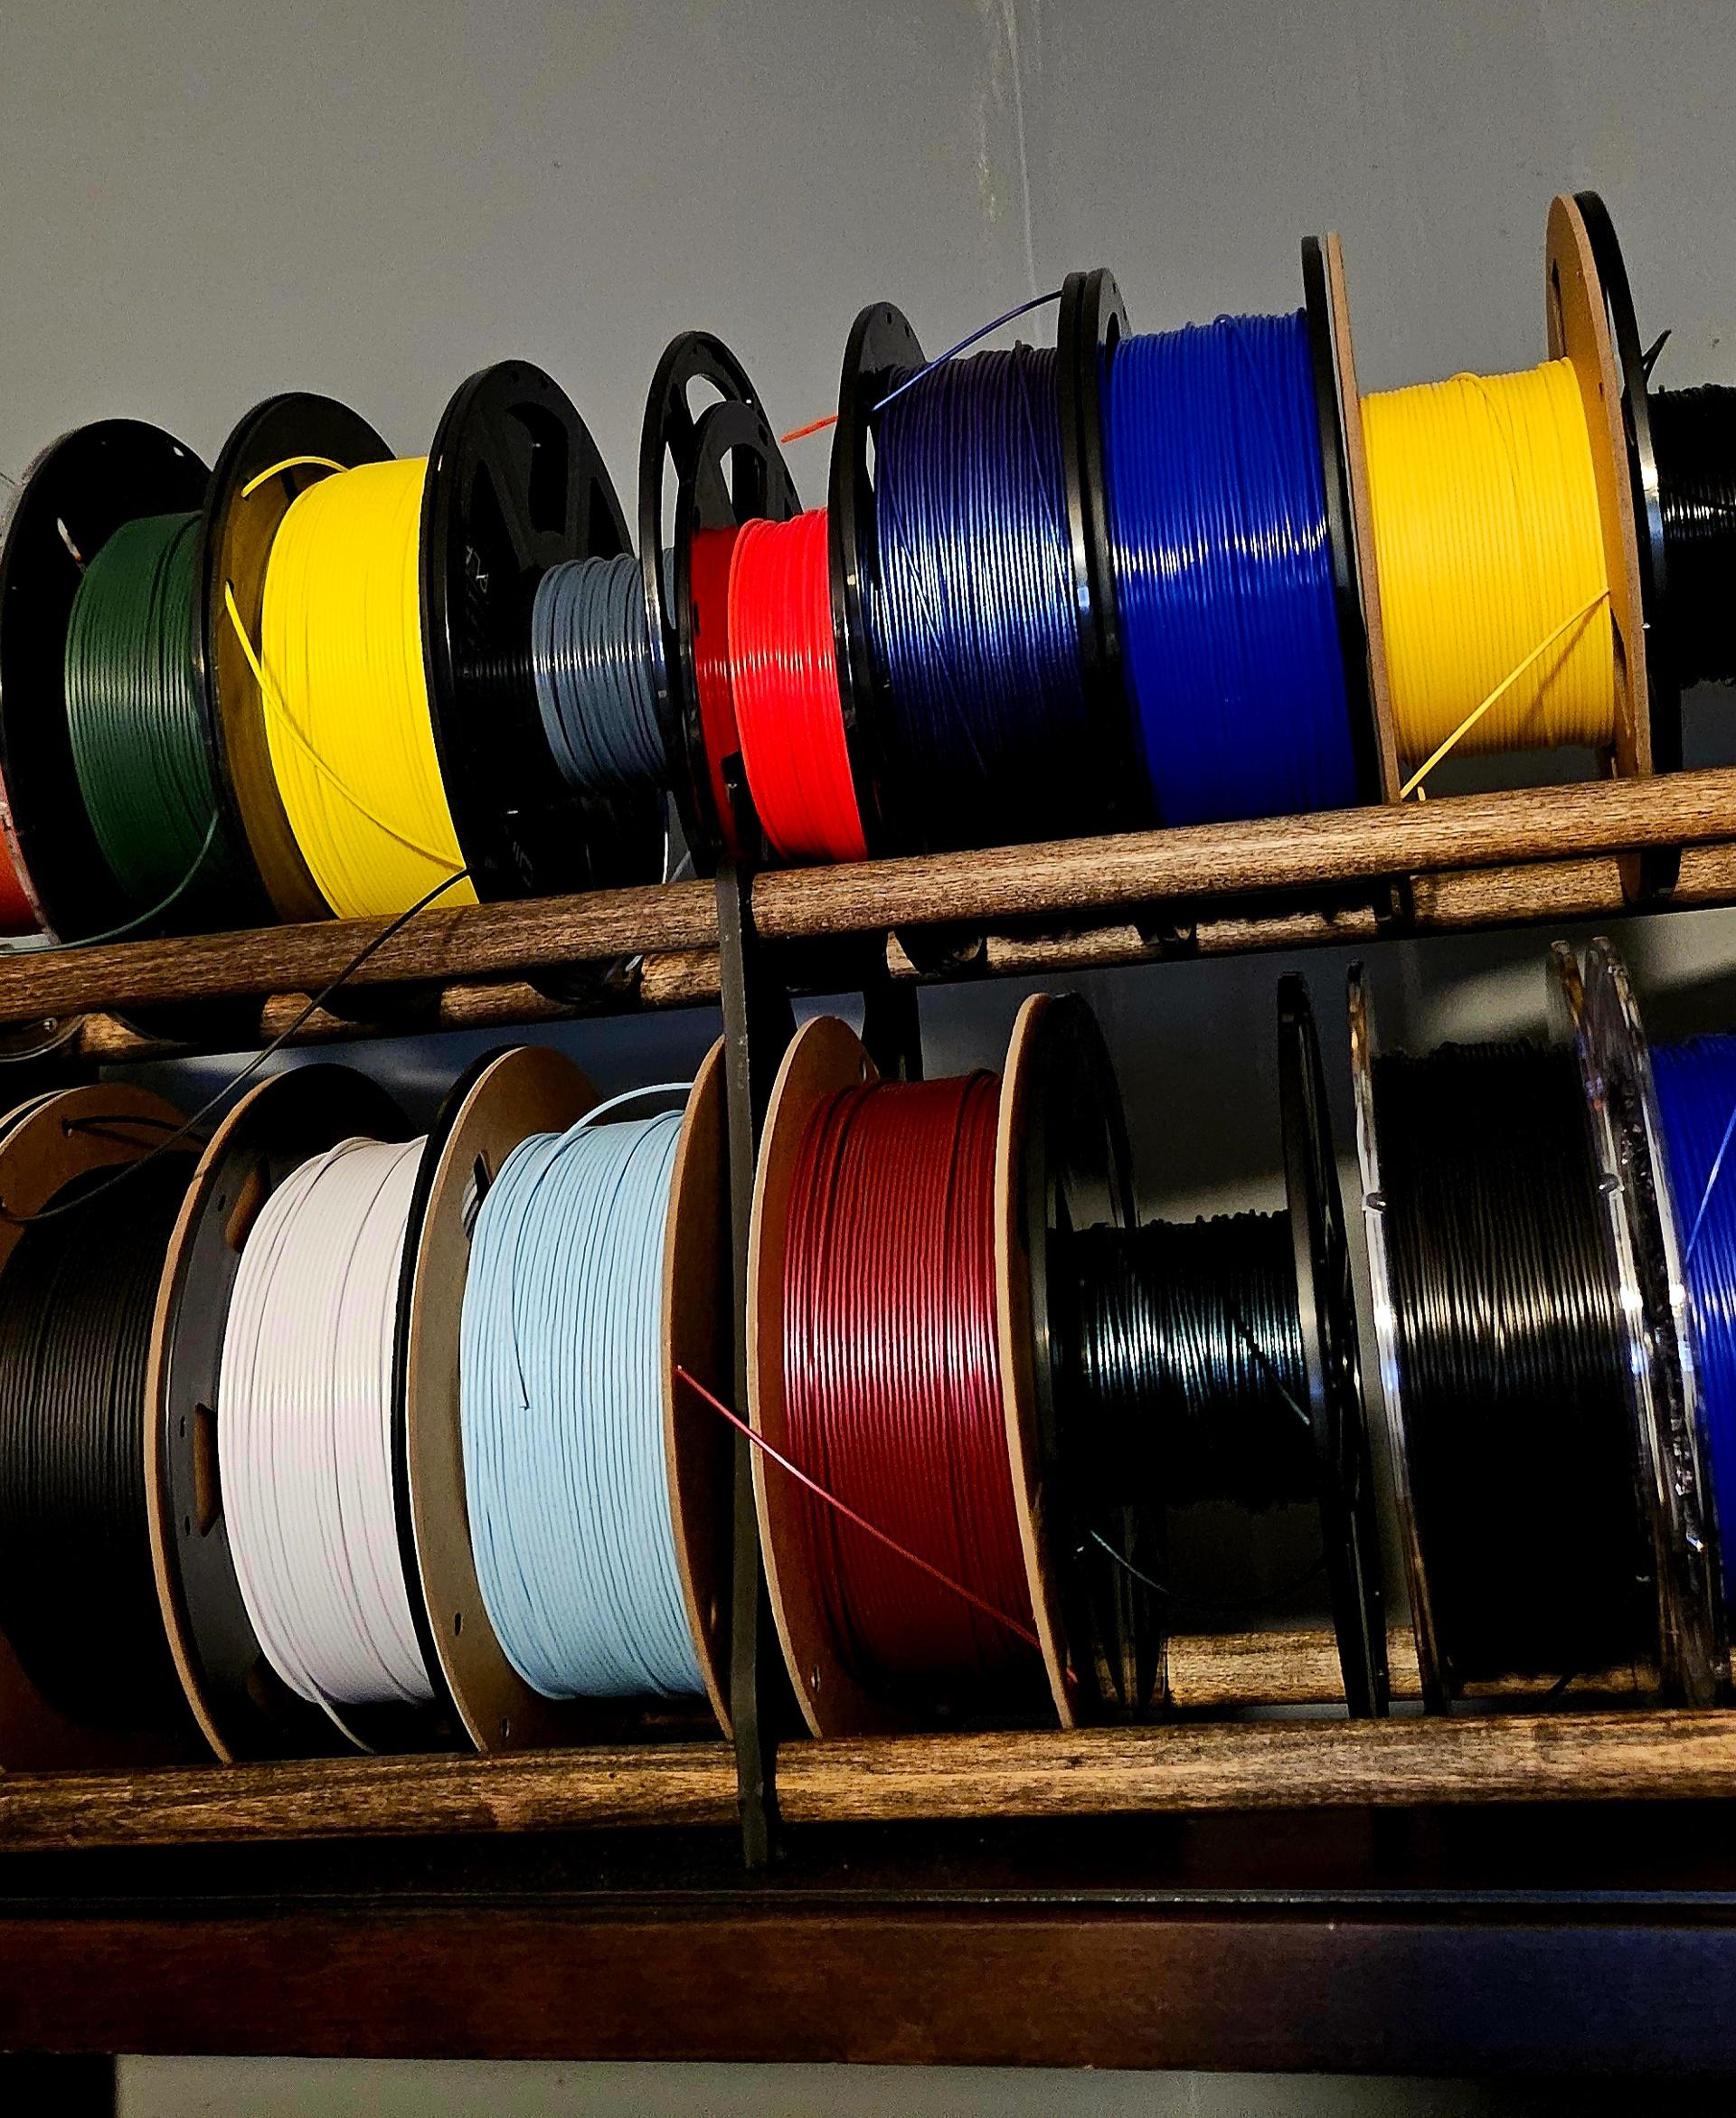 Double Rack - DIY Filament Storage - RepRack Remix! - Used wood dowels instead of pipe and it turned out great. - 3d model